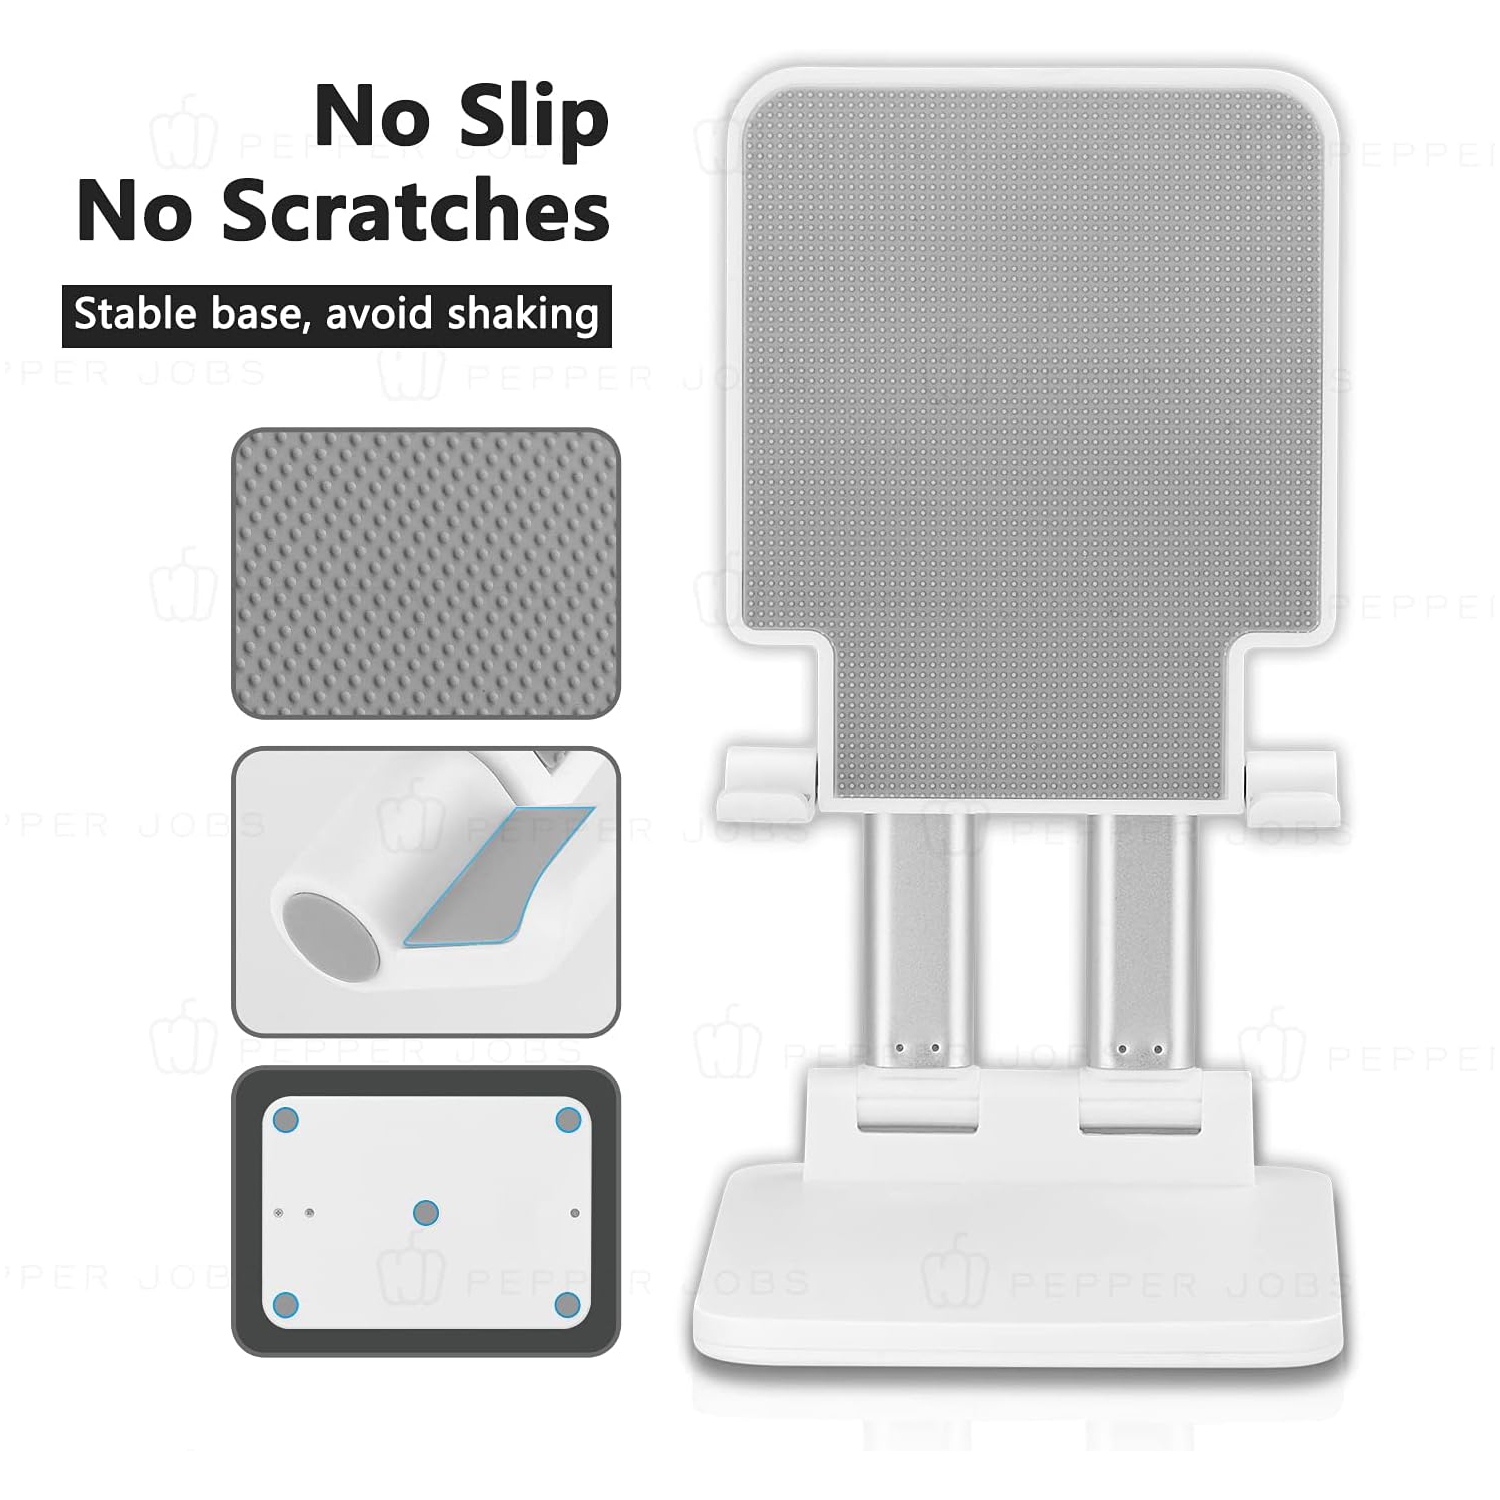 SSS-T6 Solid Sturdy Stand Monitor Stand